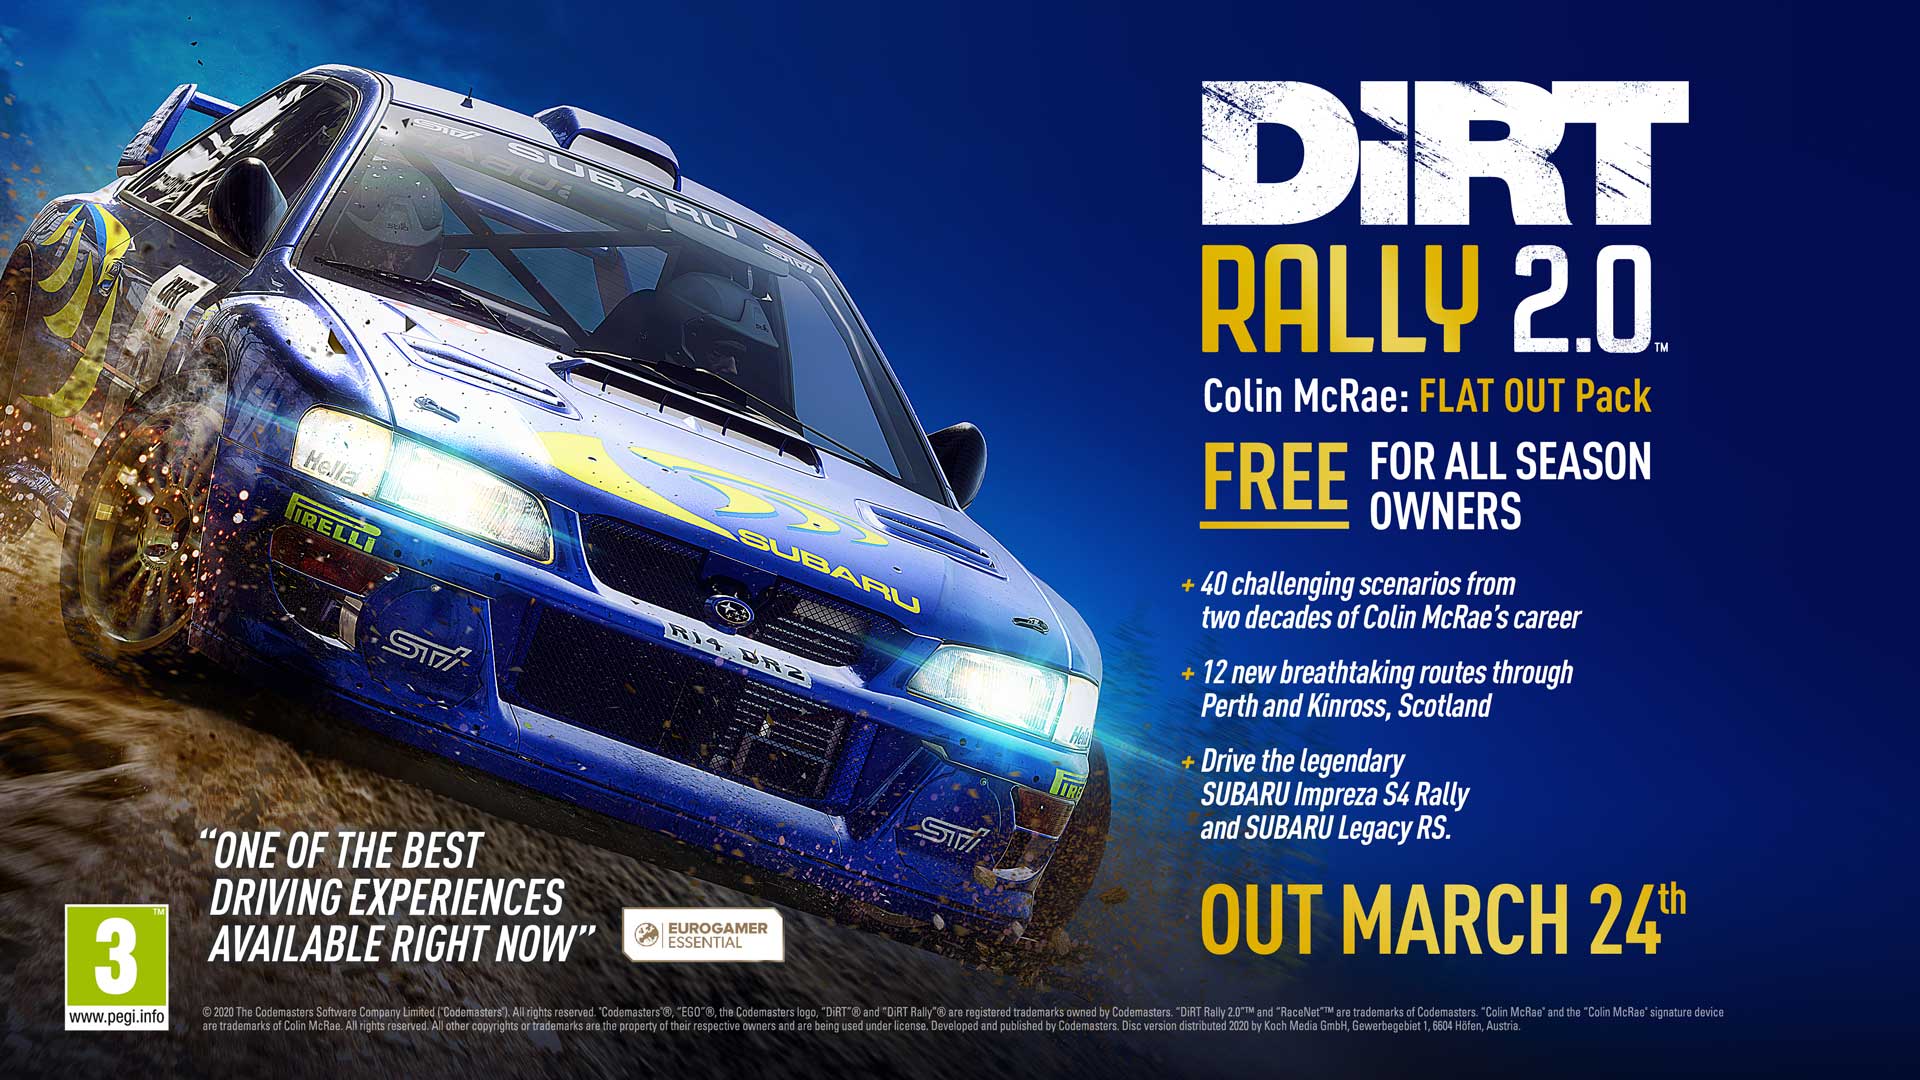 DiRT Rally 2.0 FLAT OUT brings Colin McRae Back to Scotland